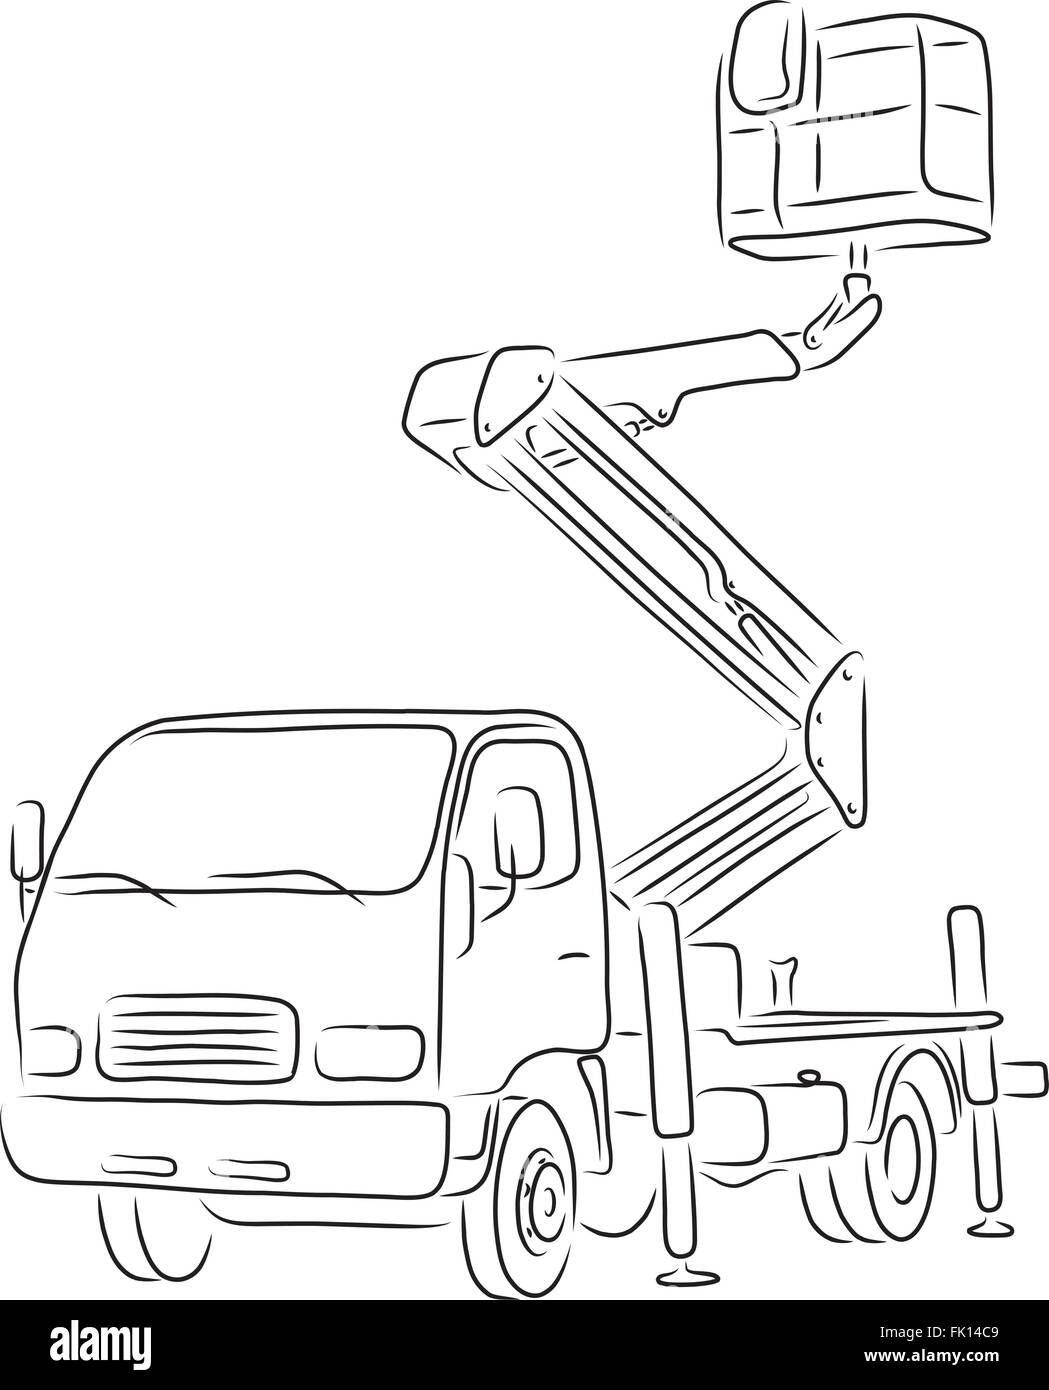 Hand-drawn outline of bucket truck isolated on white background. Art vector illustration for your design Stock Vector